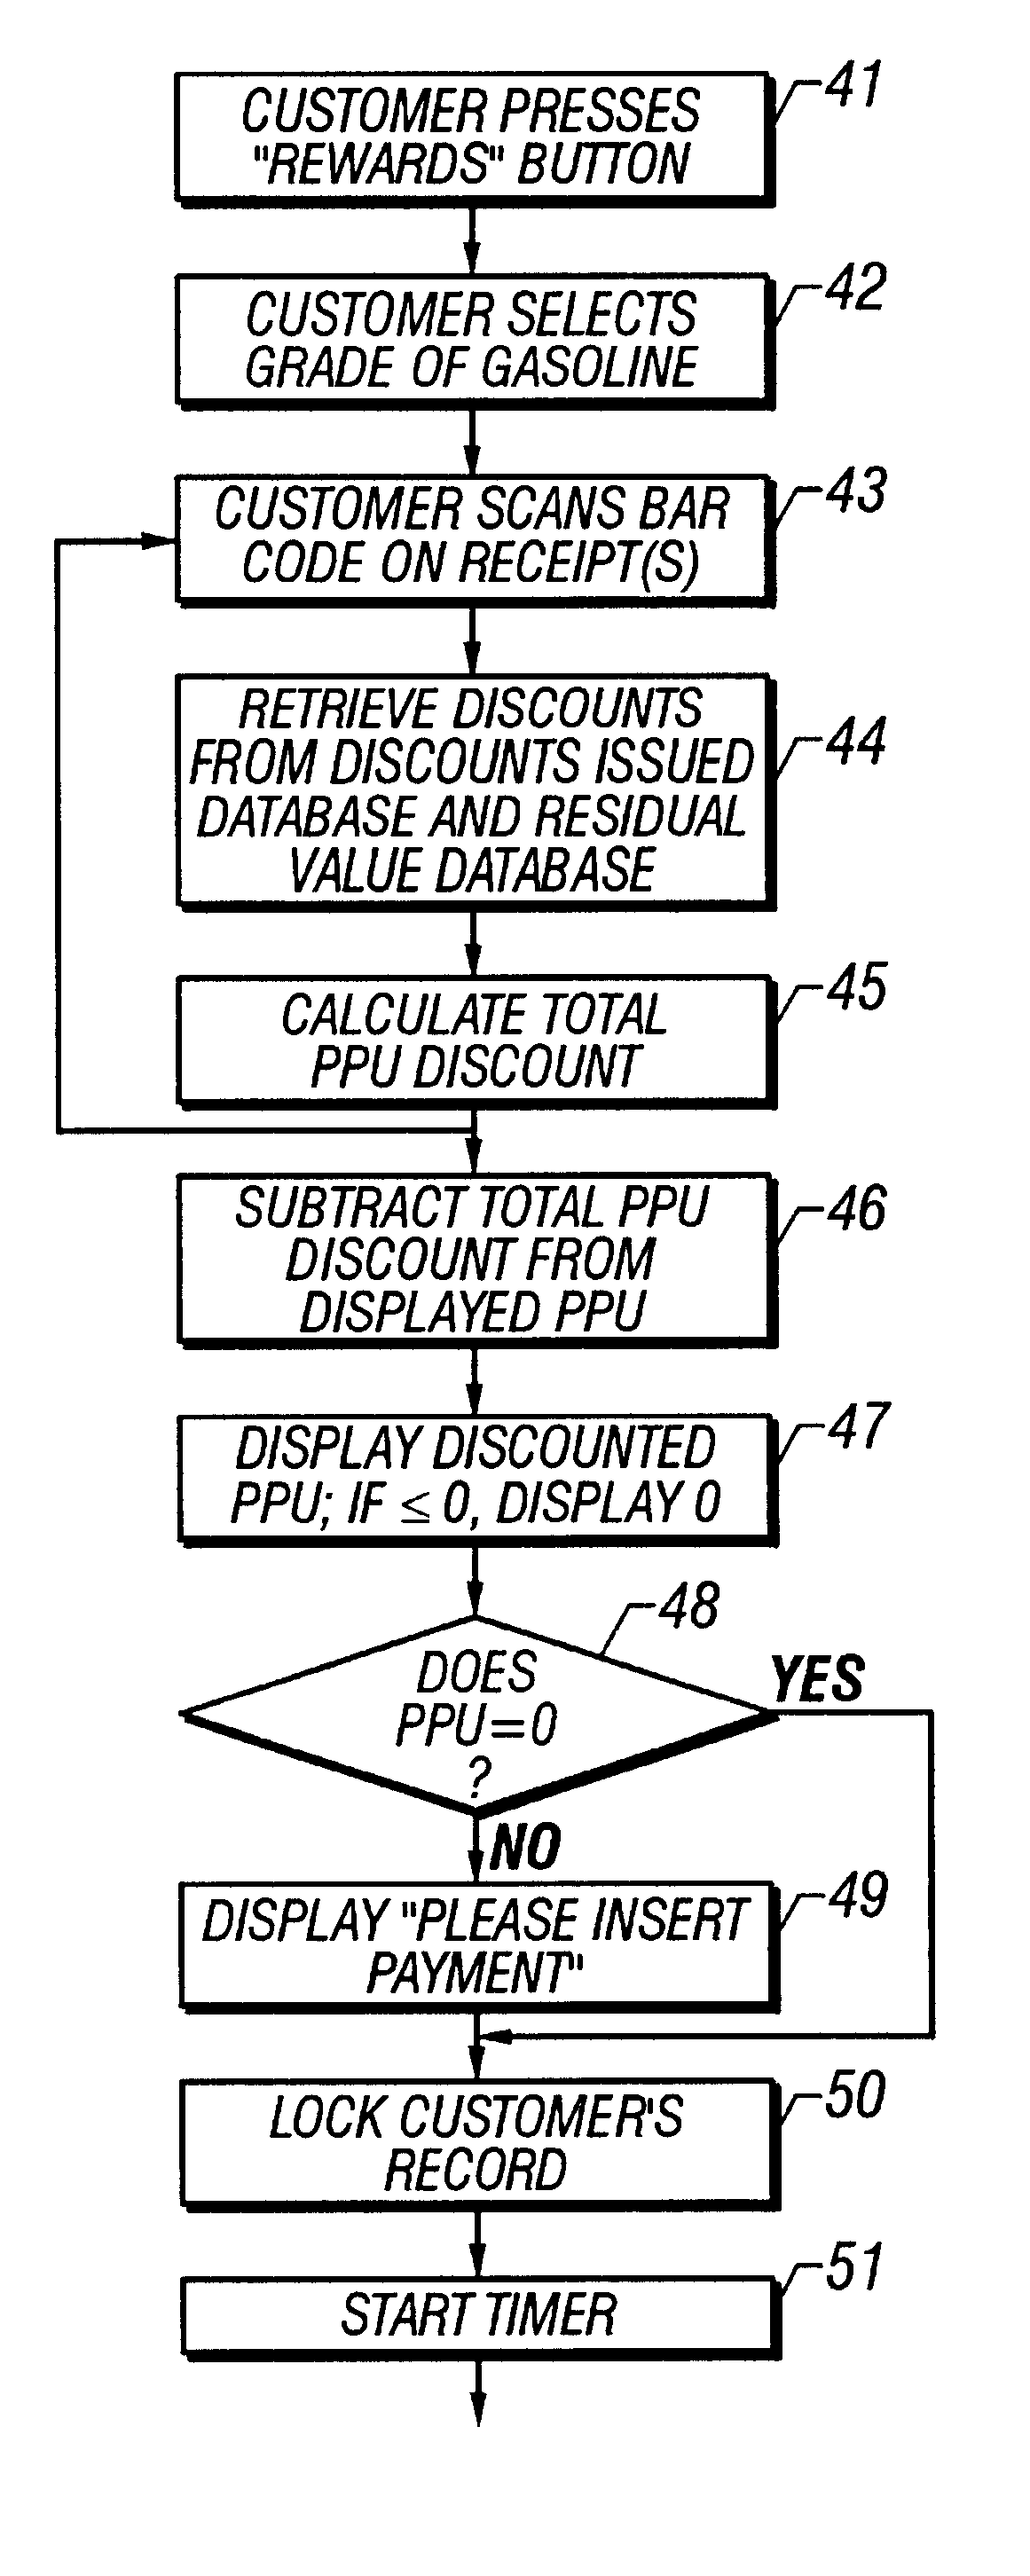 System and method of providing multiple level discounts on cross-marketed products and discounting a price-per-unit-volume of gasoline